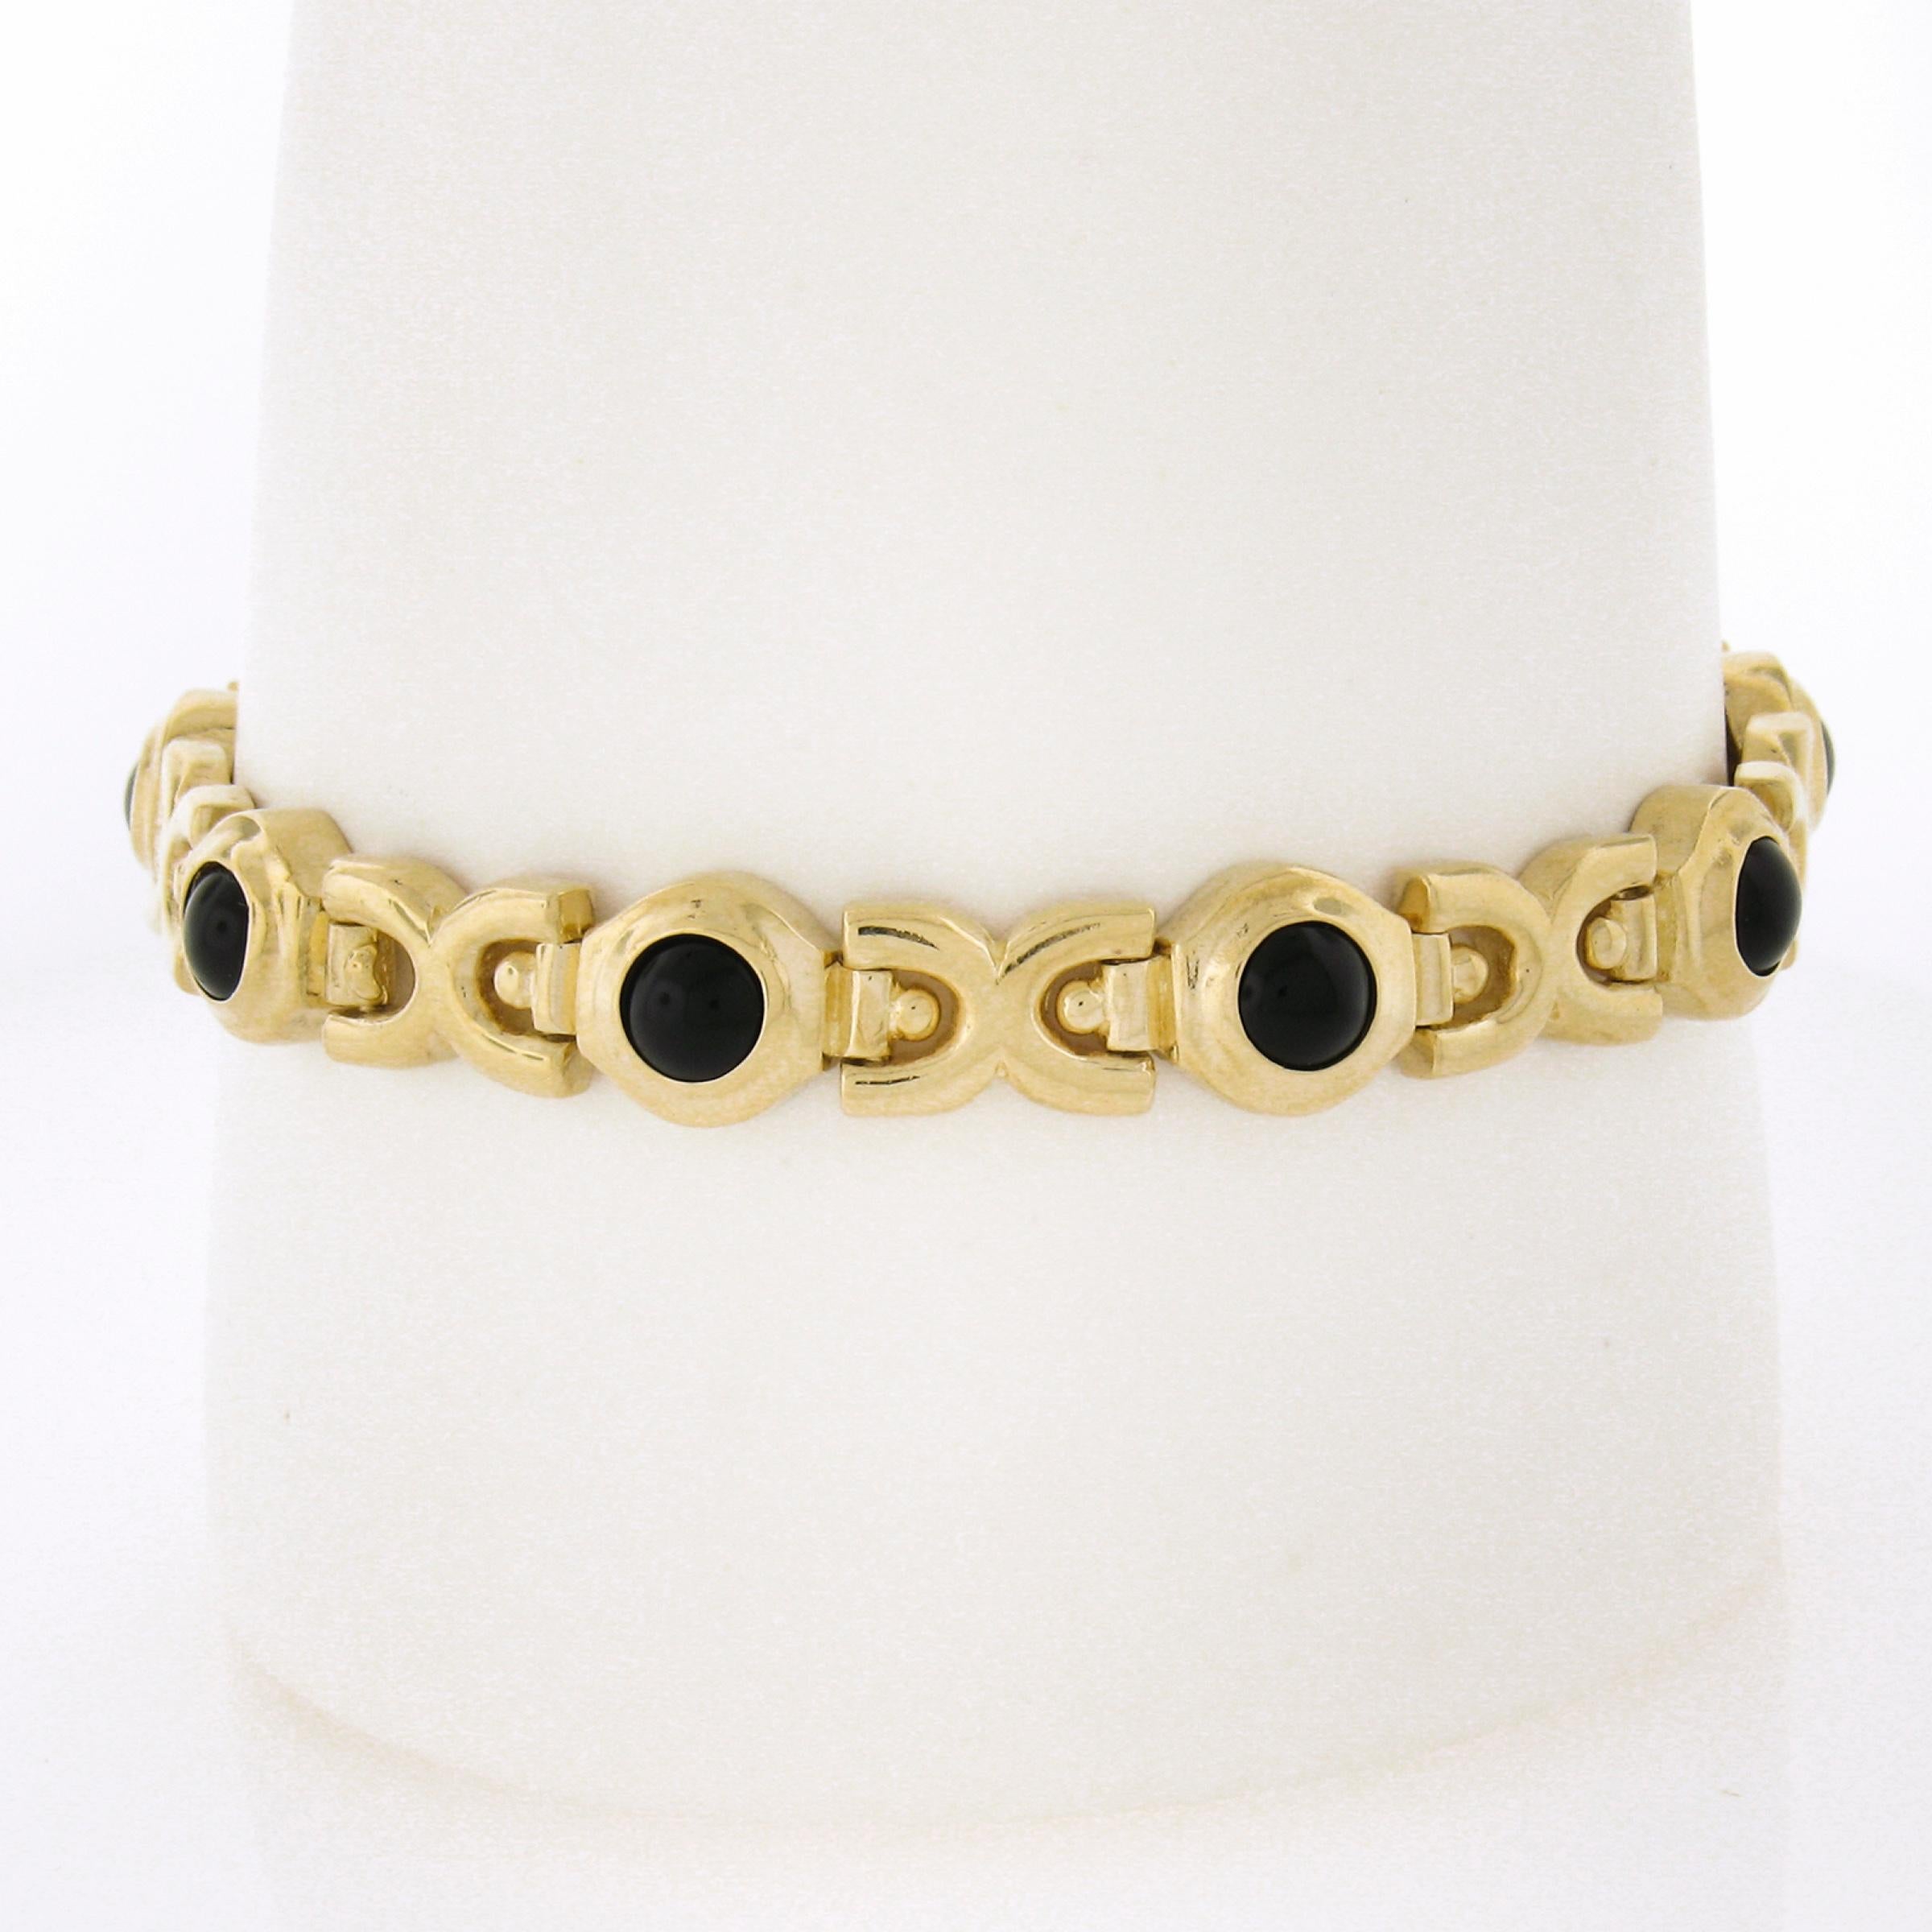 This gorgeous, vintage piece was crafted from solid 14k yellow gold, Featuring a geometric link design. The bracelet features 8 round cabochon cut black onyx stones perfectly bezel set at the top, adding such an elegant and bold touch to the